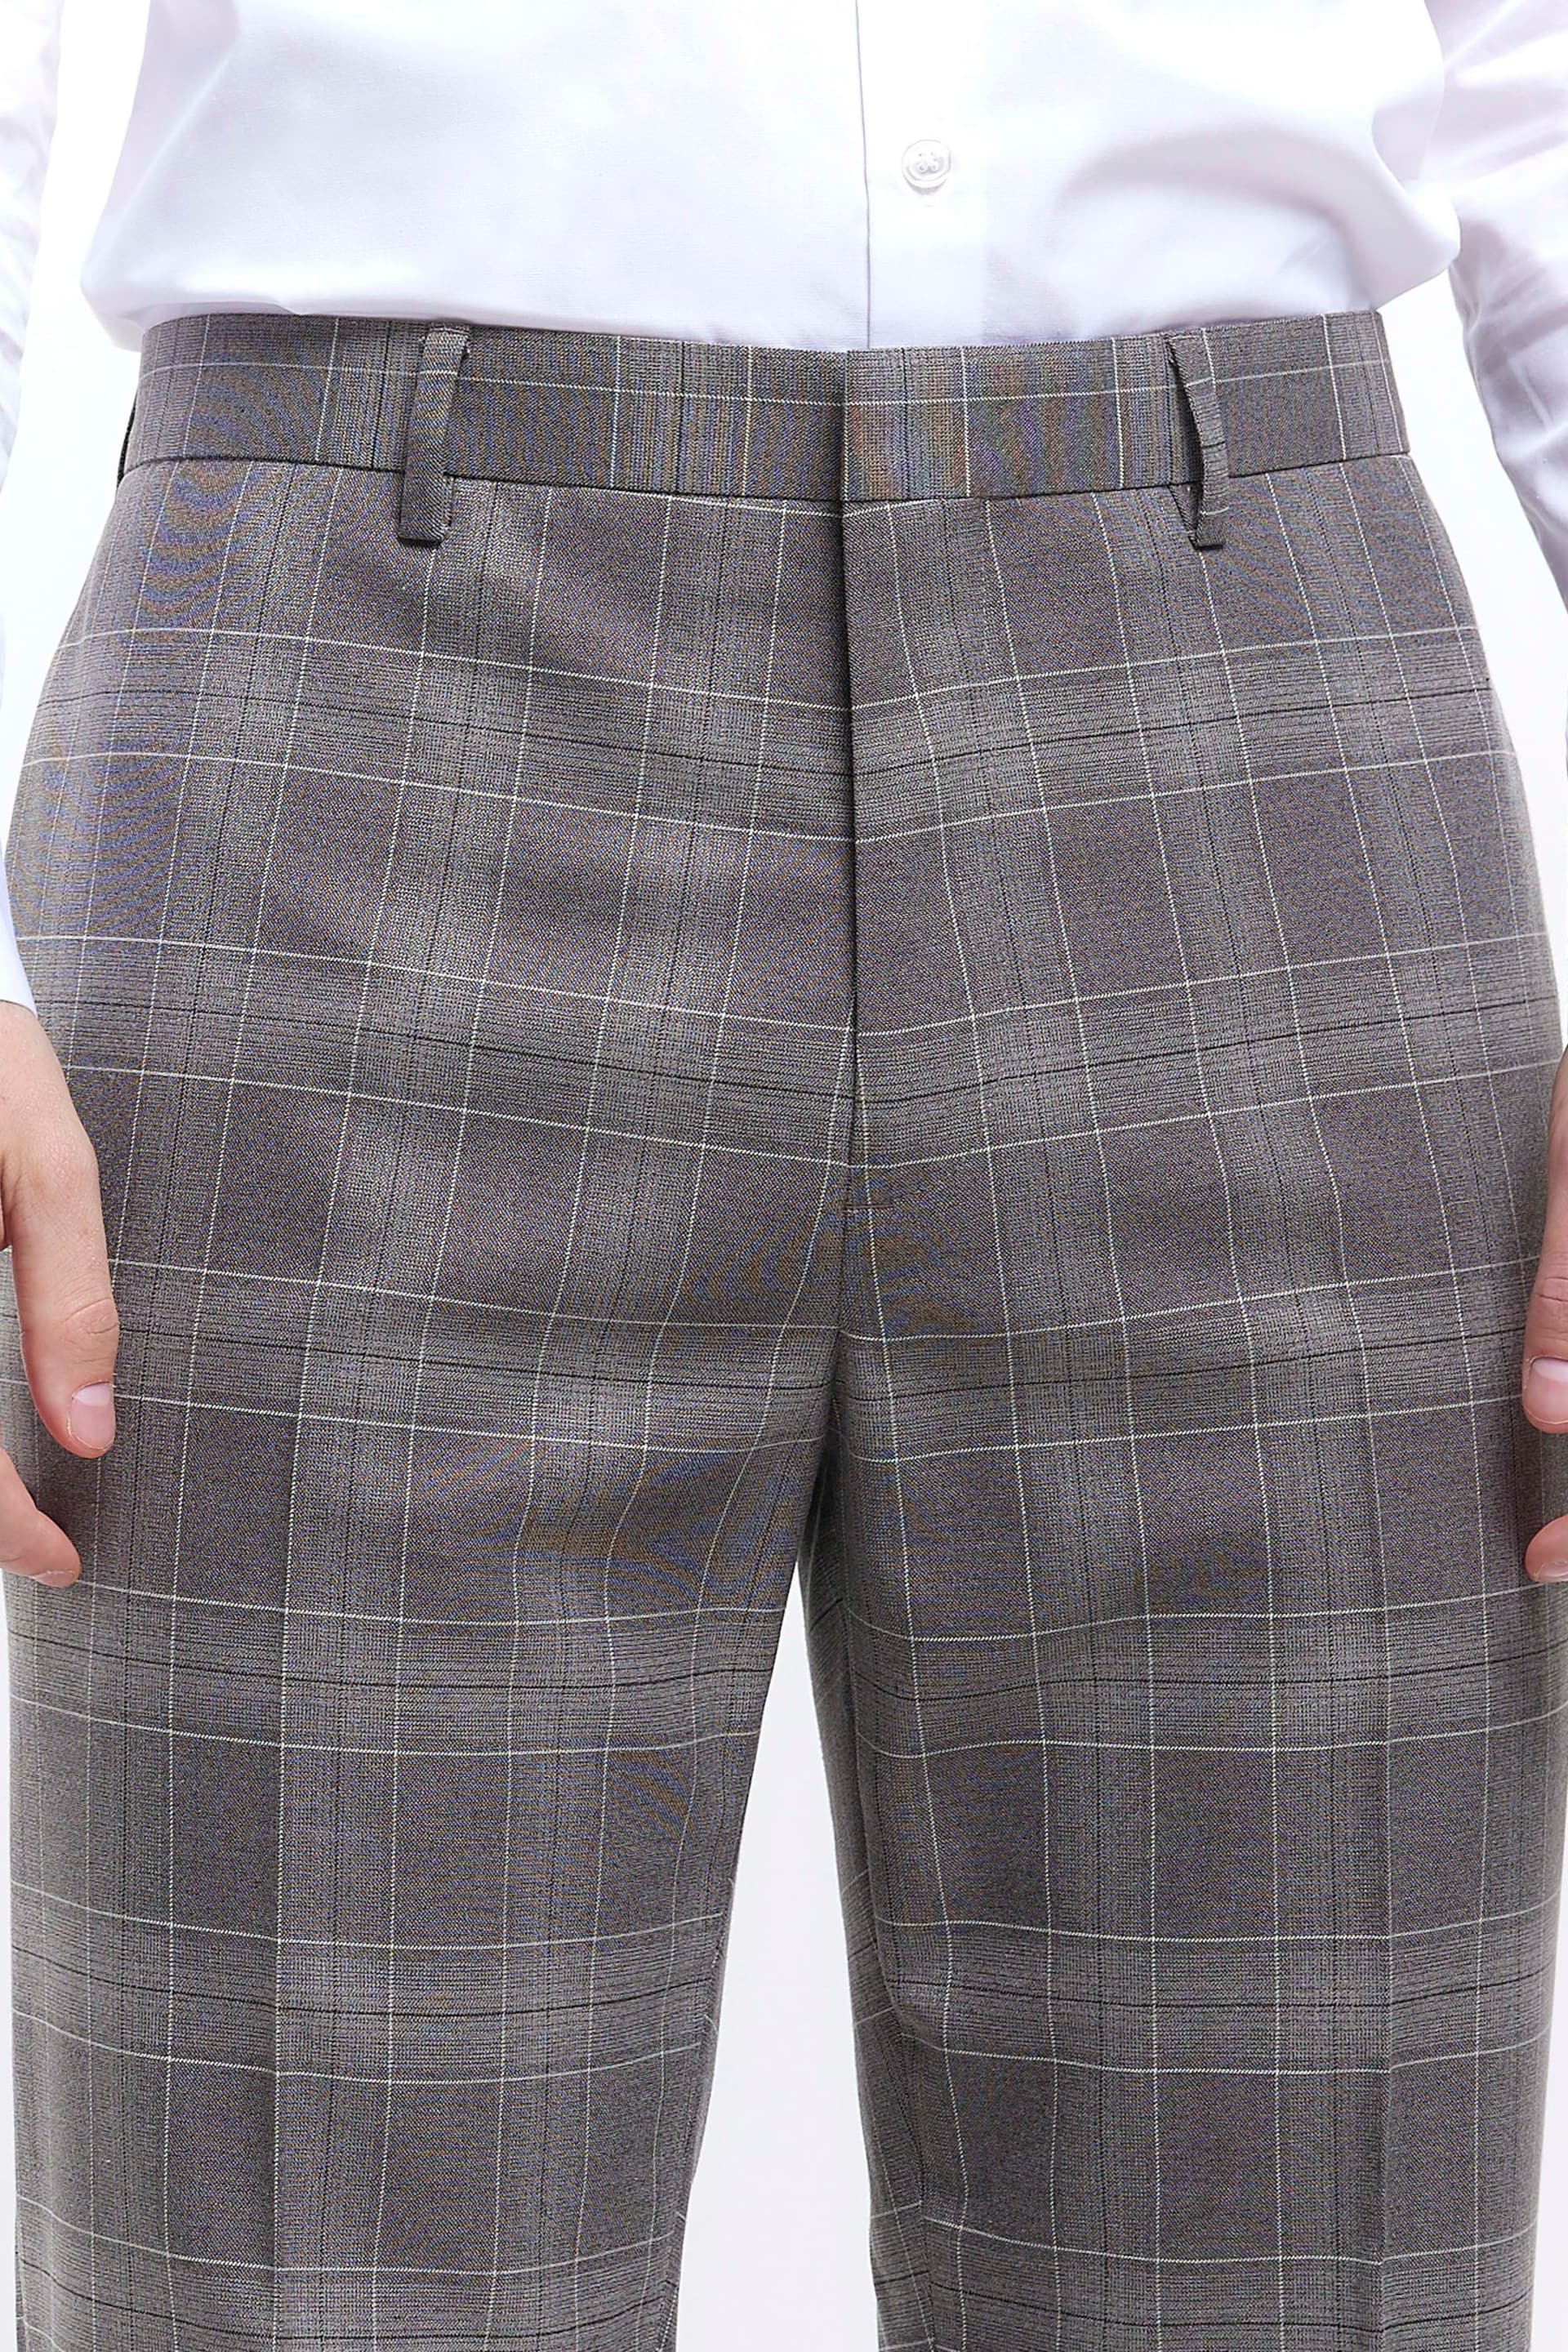 River Island Grey Check Trousers - Image 3 of 3